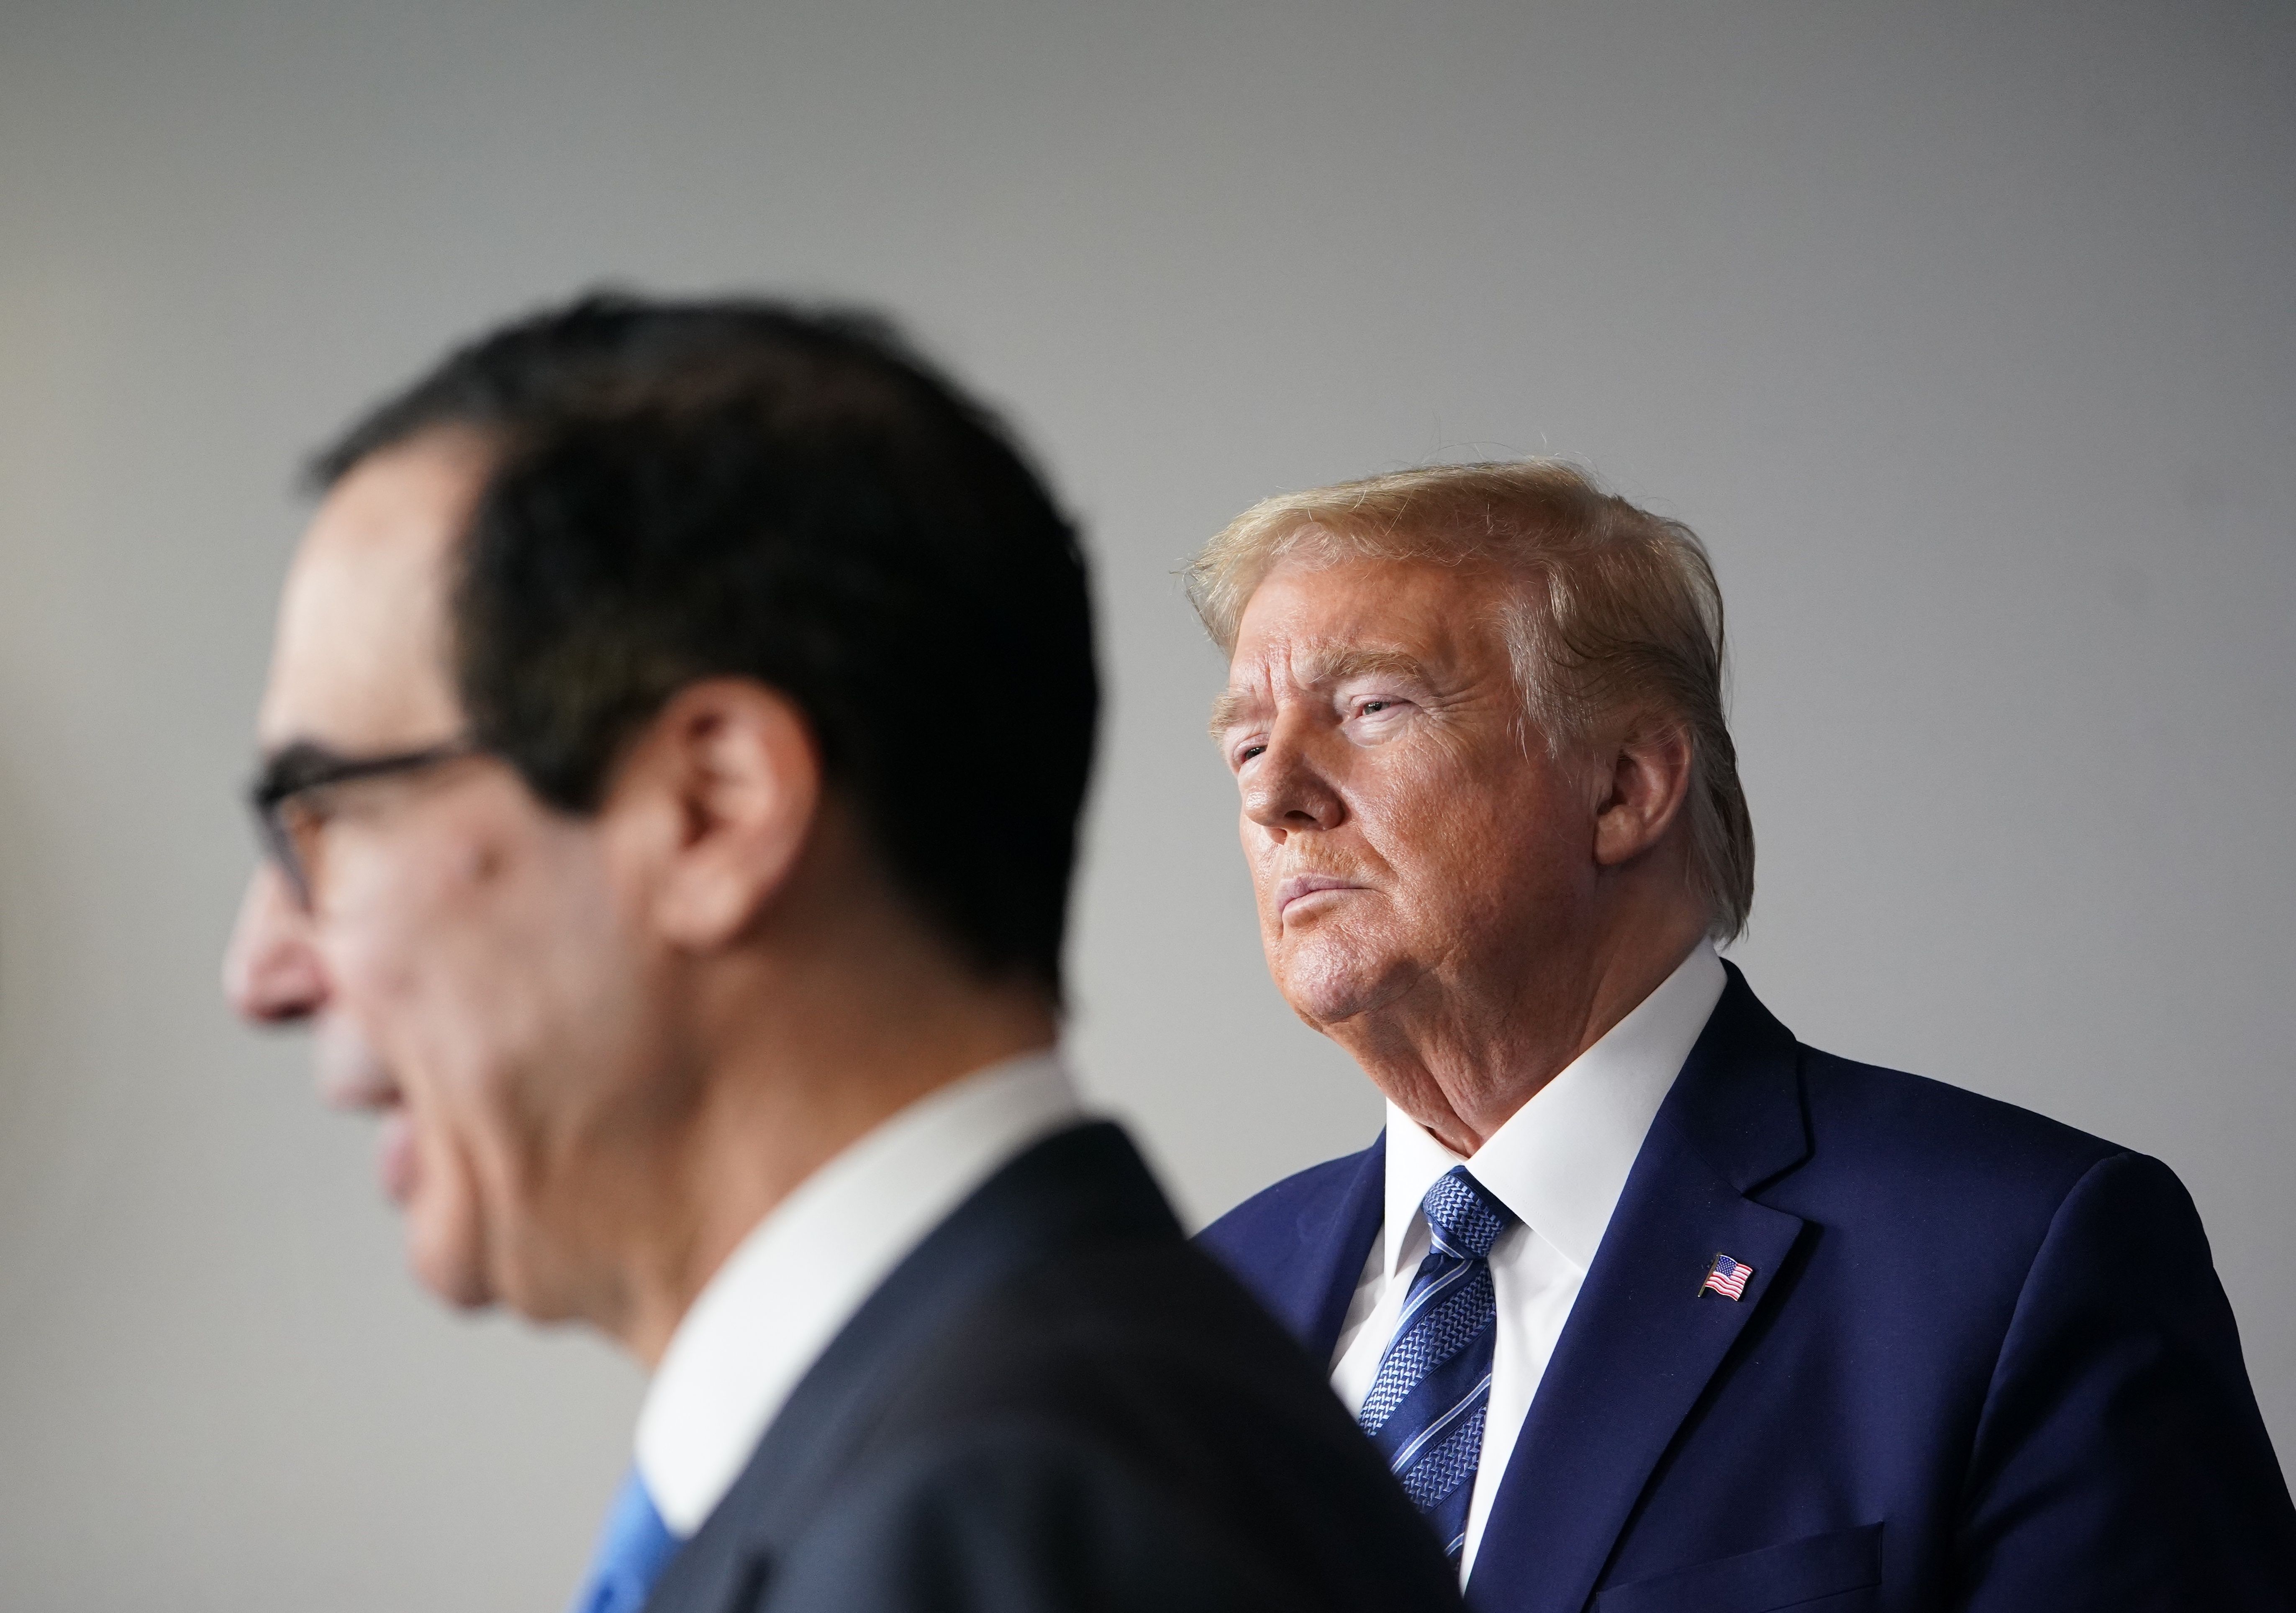 US President Donald Trump listens as Treasury Secretary Steven Mnuchin speaks during the daily briefing on the novel coronavirus, COVID-19, in the Brady Briefing Room of the White House in Washington, DC on April 21, 2020. (Photo by MANDEL NGAN/AFP via Getty Images)